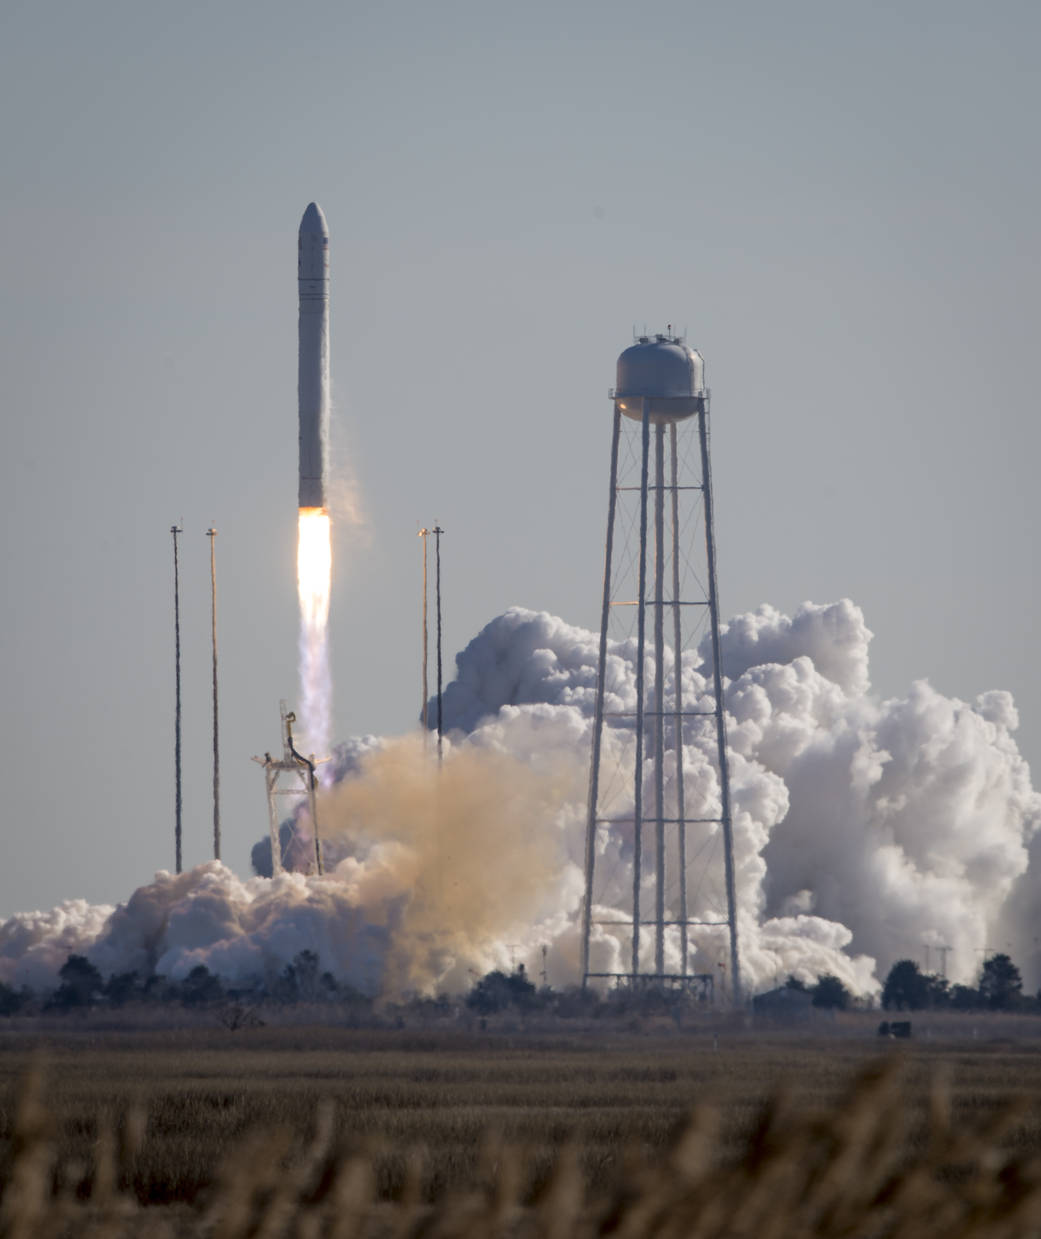 An Orbital Sciences Corporation Antares rocket is seen as it launches from Pad-0A at NASA's Wallops Flight Facility, Thursday, J